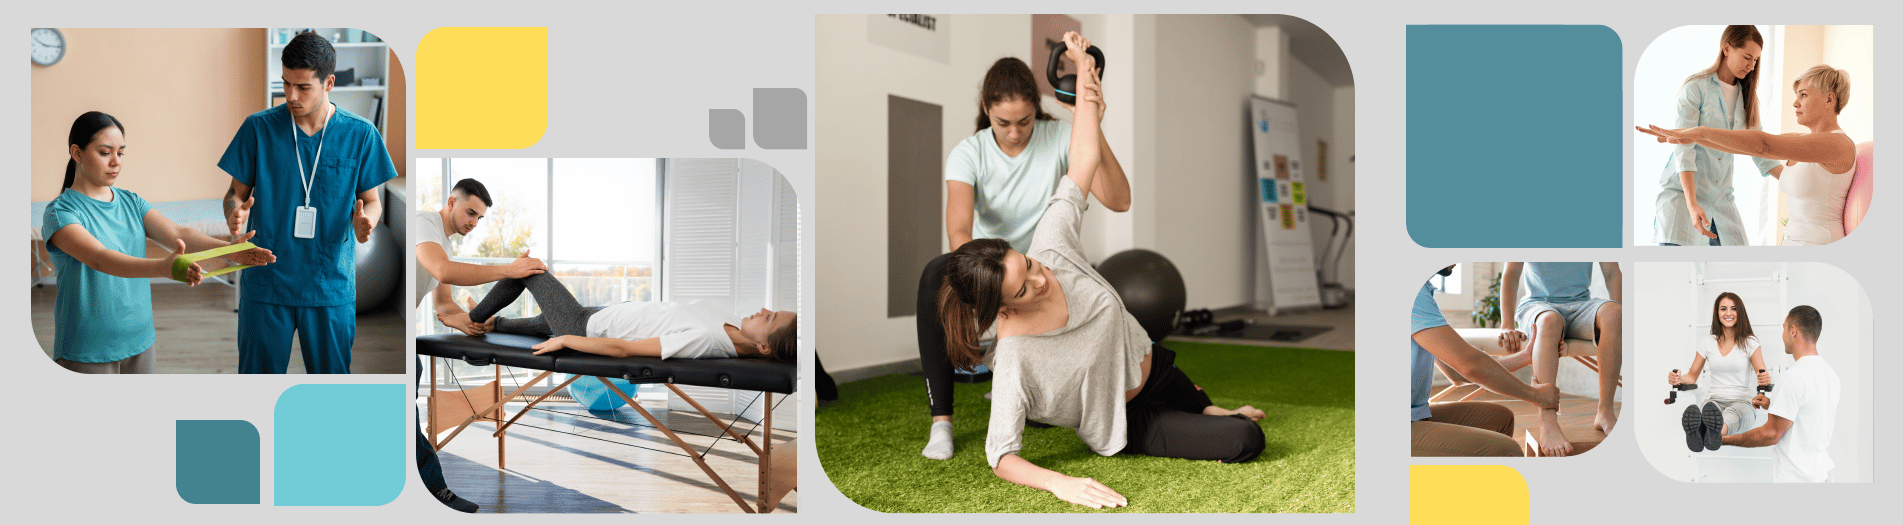 MHPT Physical Therapy Services in Manhattan & Brooklyn